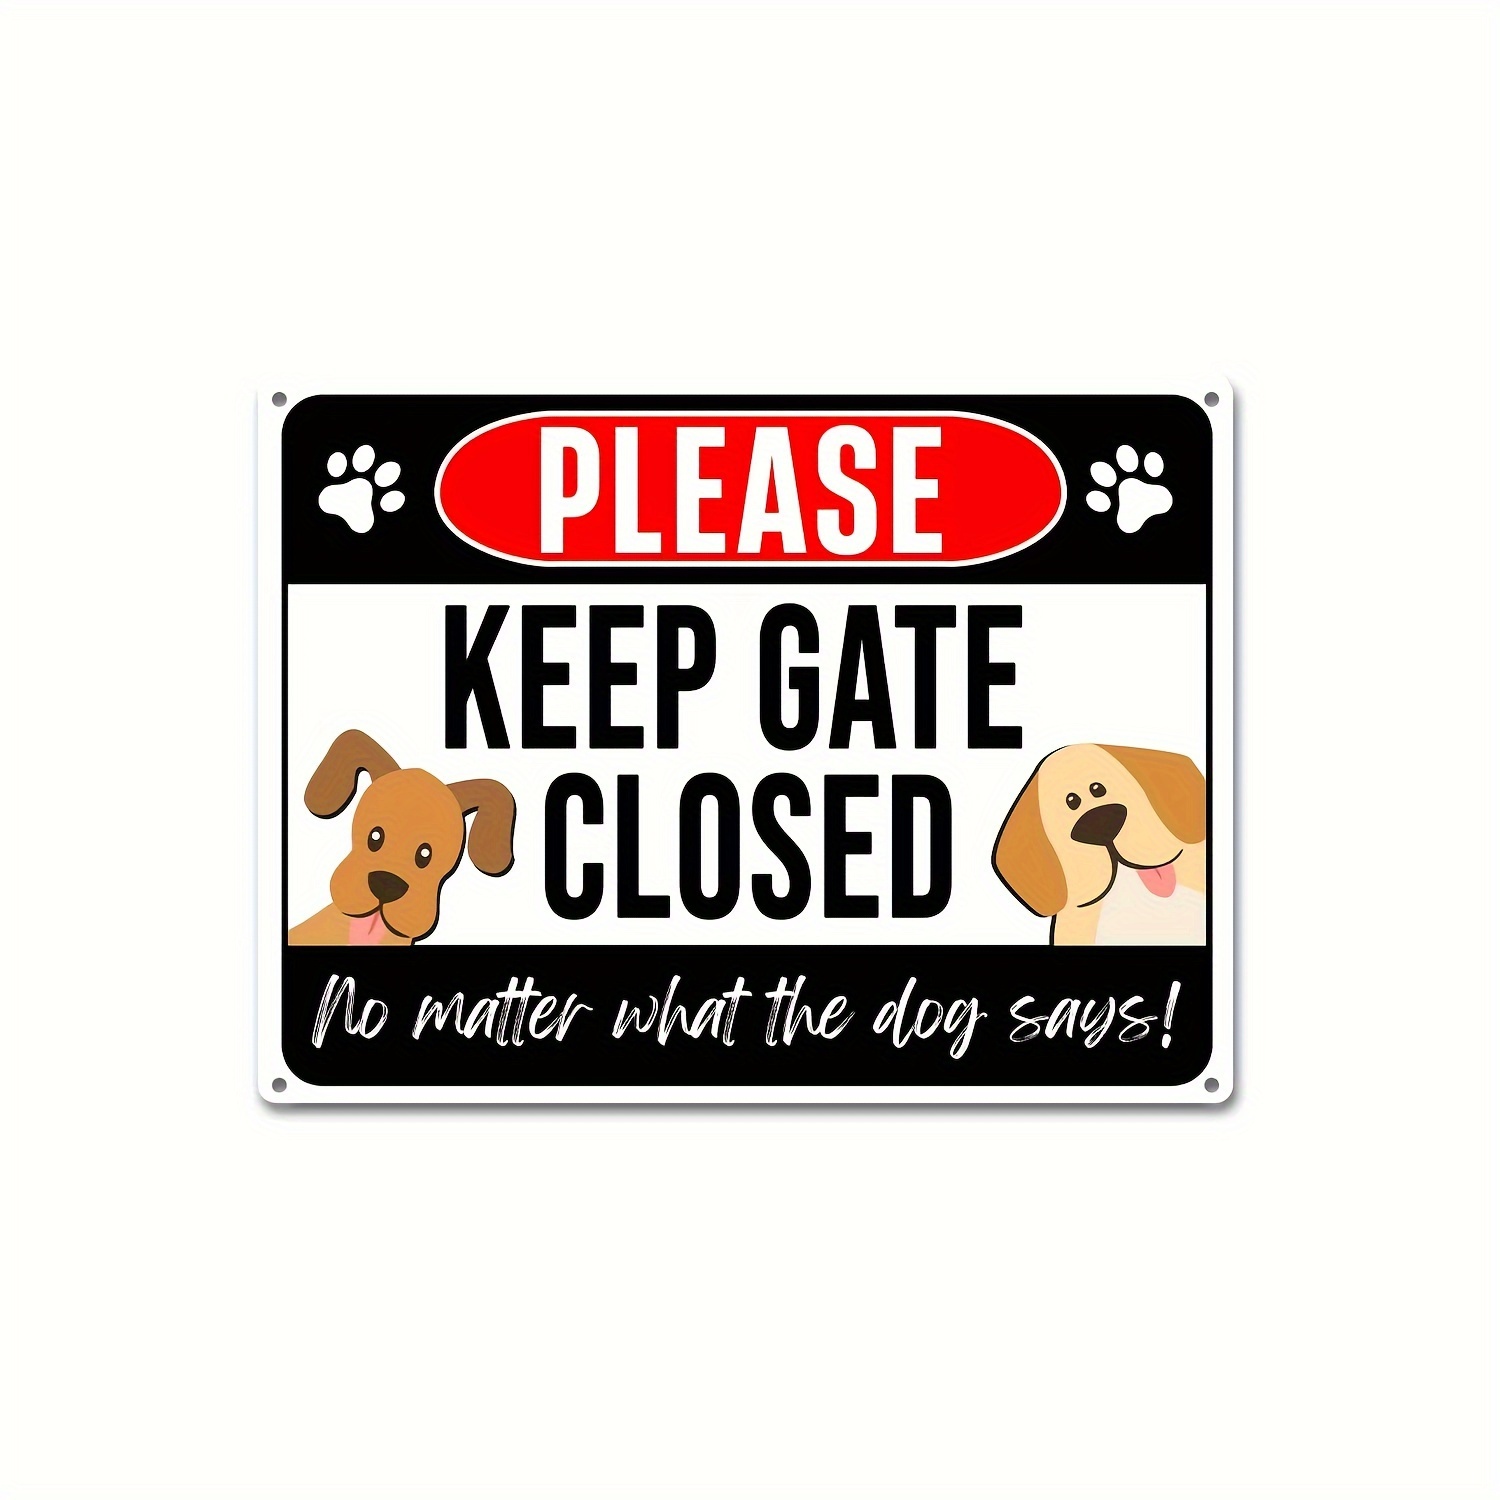 

1pc Retro Metal Aluminum Sign, Keep Gate Closed Sign, Dogs Wall Art Decor, Iron Painting, Vintage Logo Garage Wall Decor, Cafe Bar Club Living Room Wall Decor Plaque, 8*12 Inches